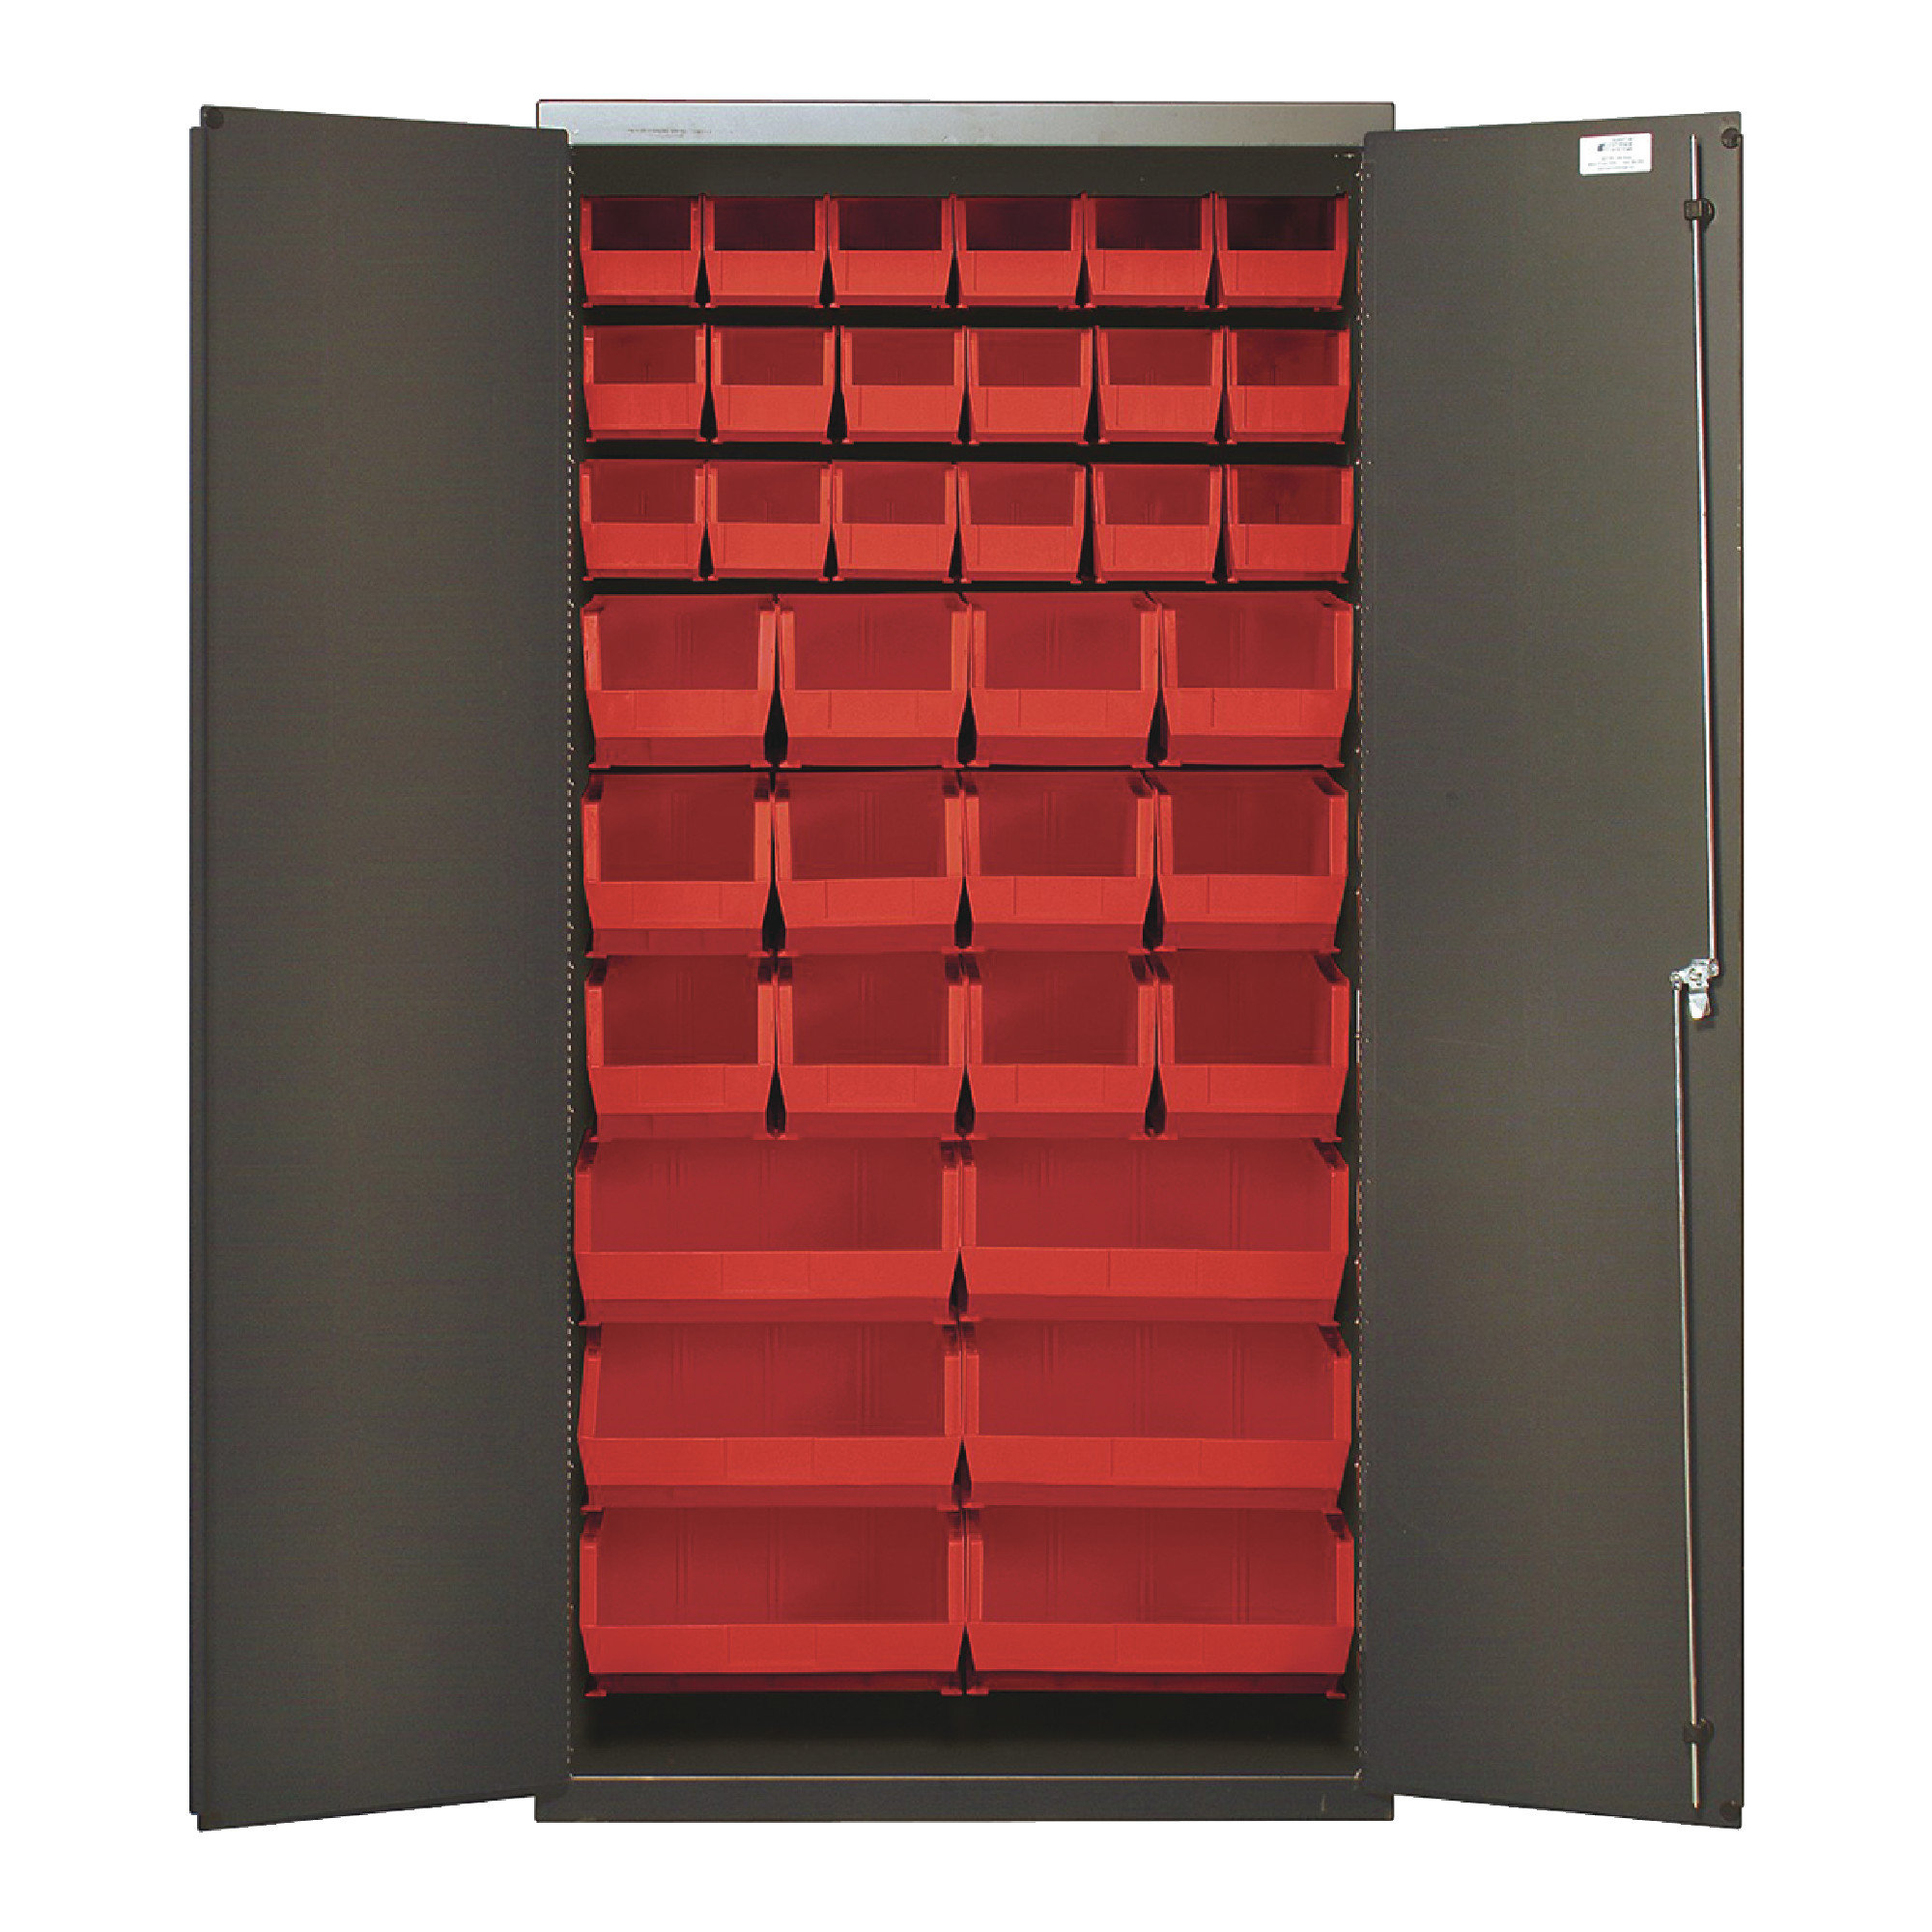 QUANTUM STORAGE SYSTEMS 36" Wide All Welded Floor Cabinet With 36 Red Bins